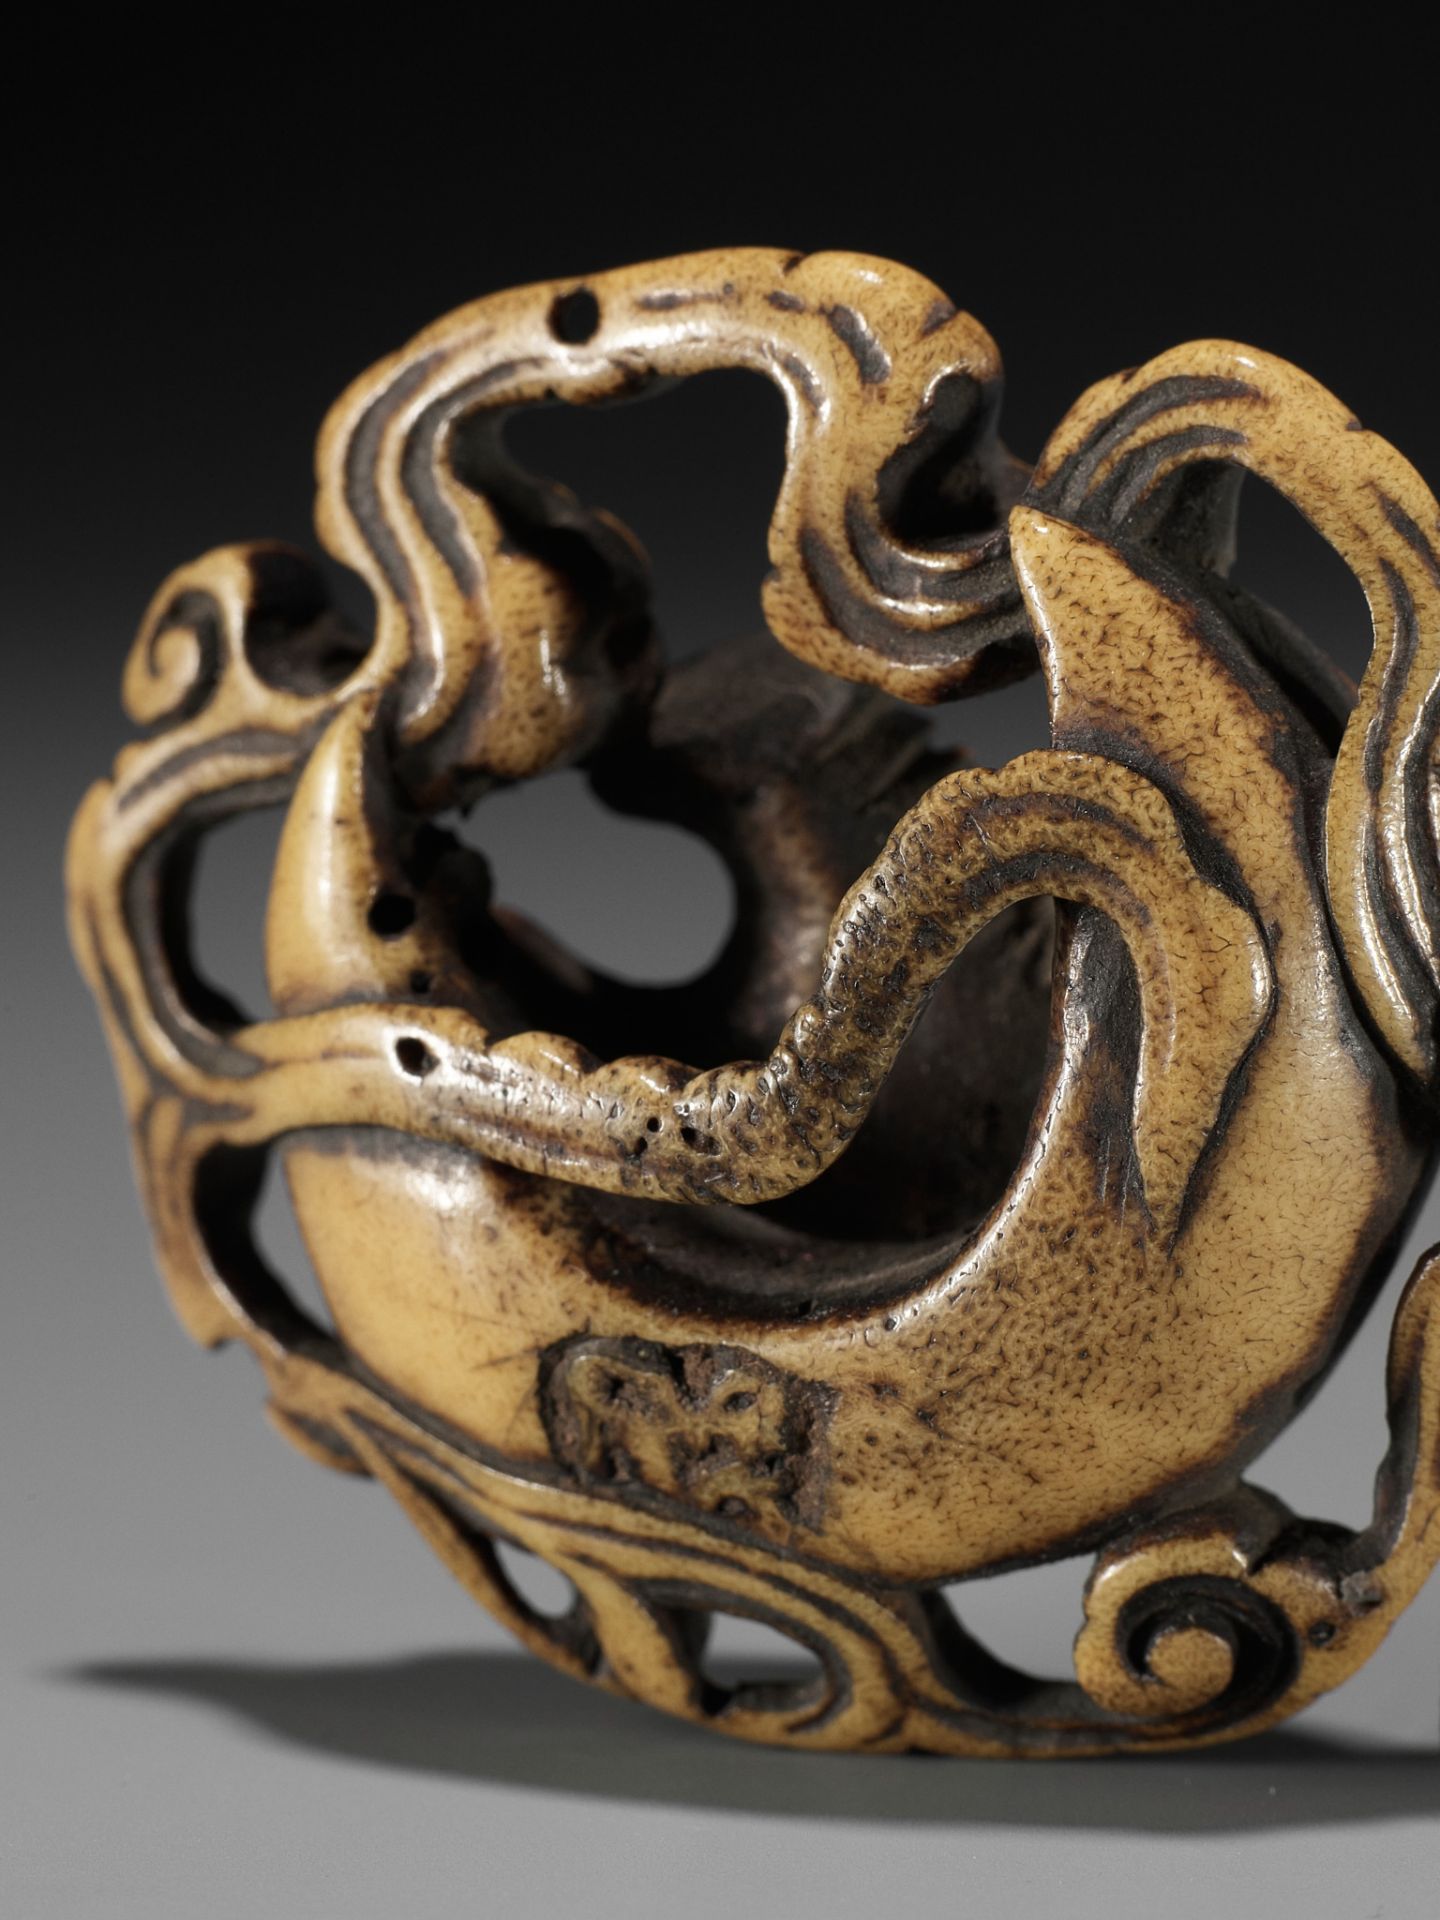 A FINE STAG ANTLER RYUSA MANJU NETSUKE OF A CUCKOO AND MOON, ATTRIBUTED TO RENSAI - Image 5 of 12